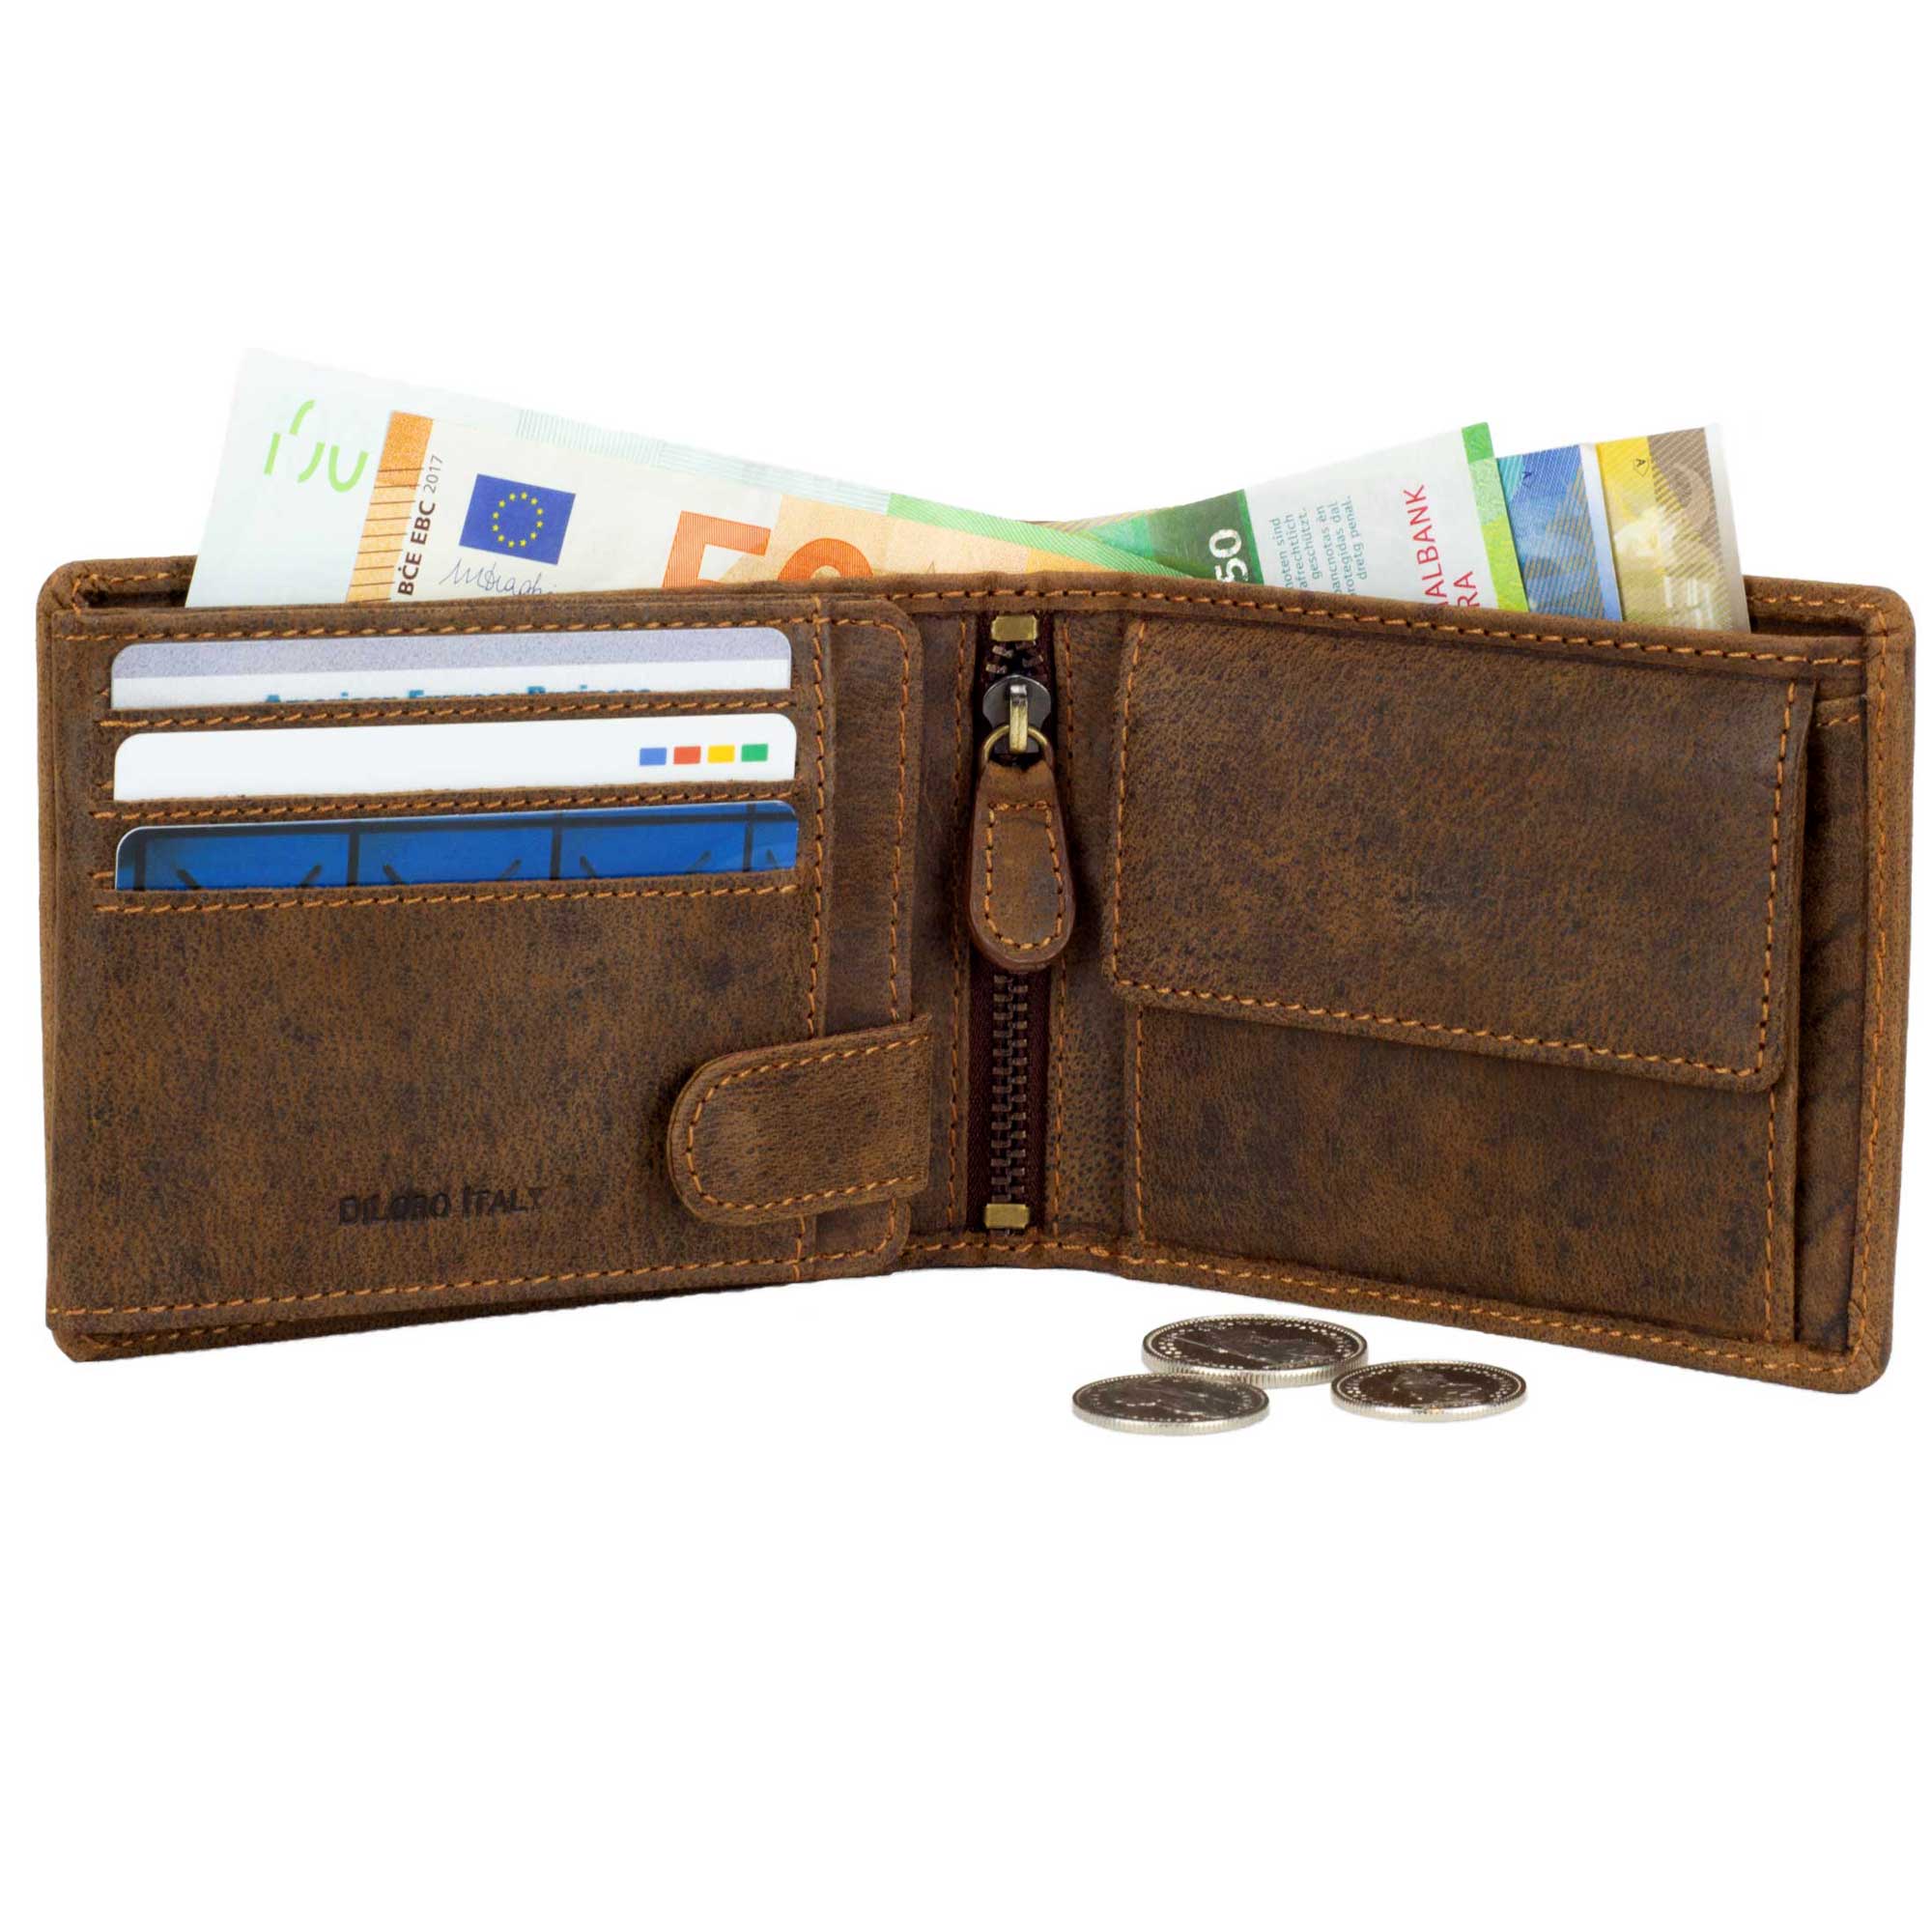 DiLoro Men's Leather Bifold Flip ID Zip Coin Wallet with RFID Protection - Dark Hunter Brown